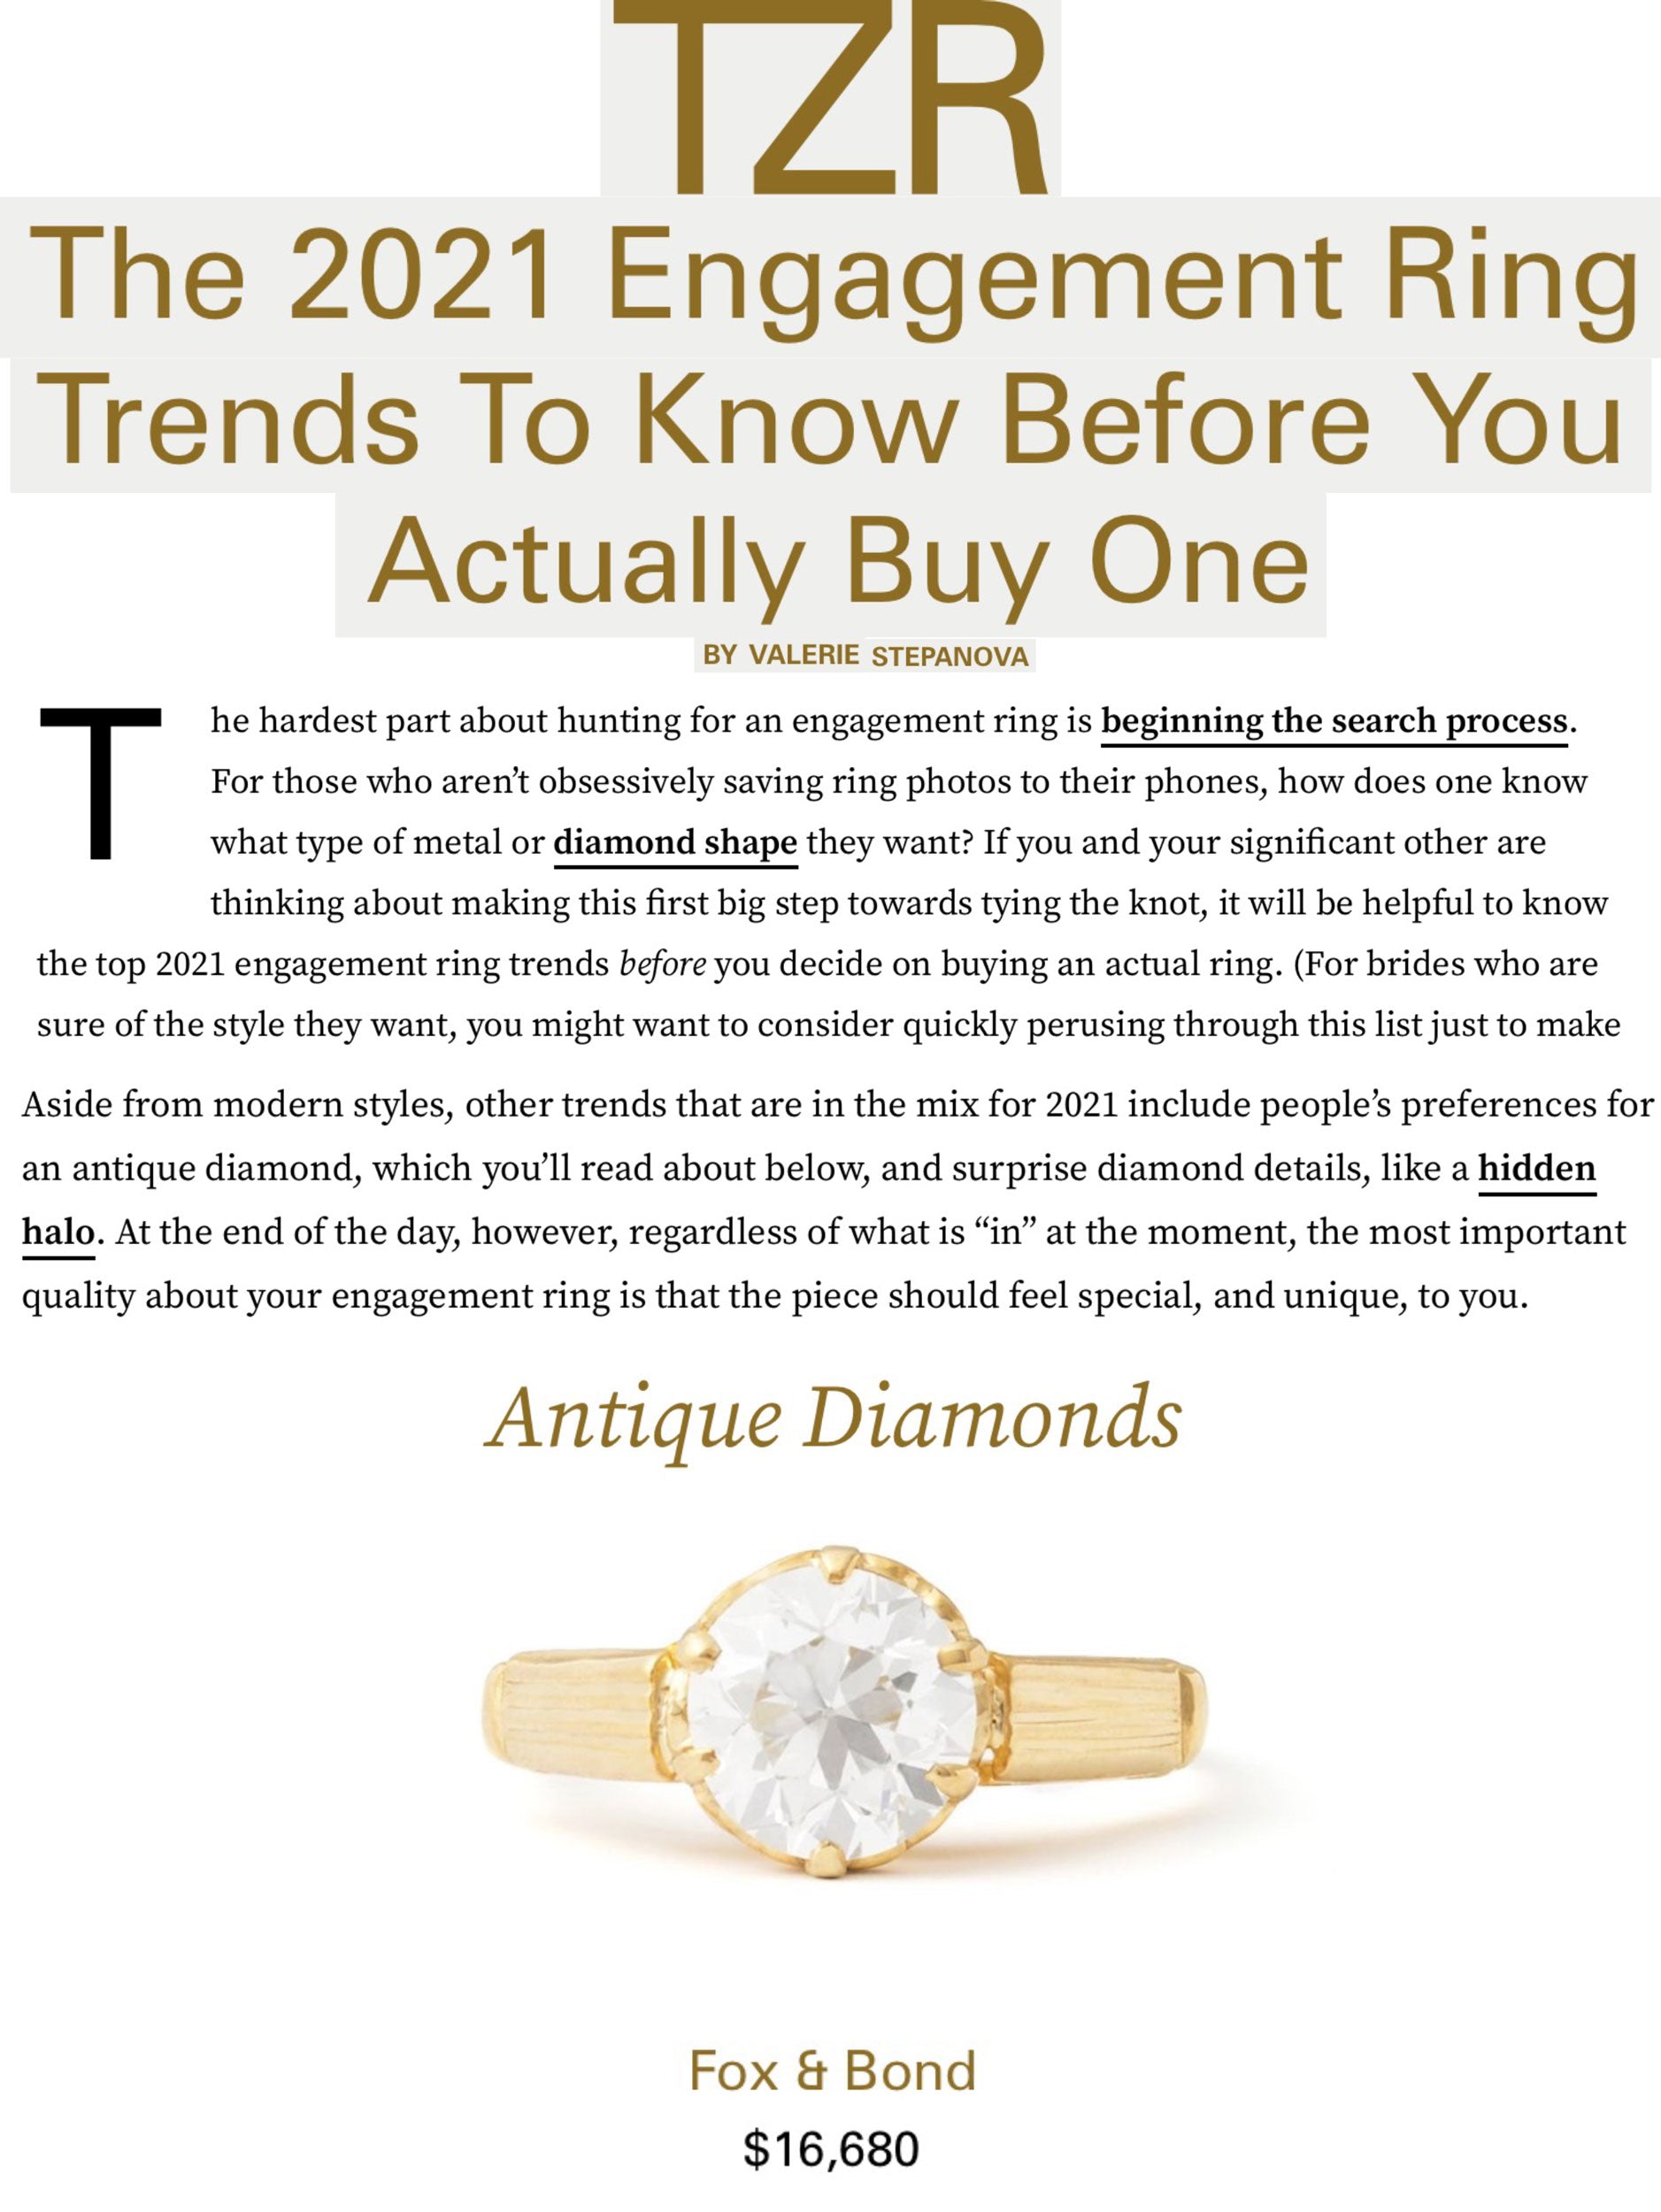 The Zoe Report: The 2021 Engagement Ring Trends To Know Before You Actually Buy One